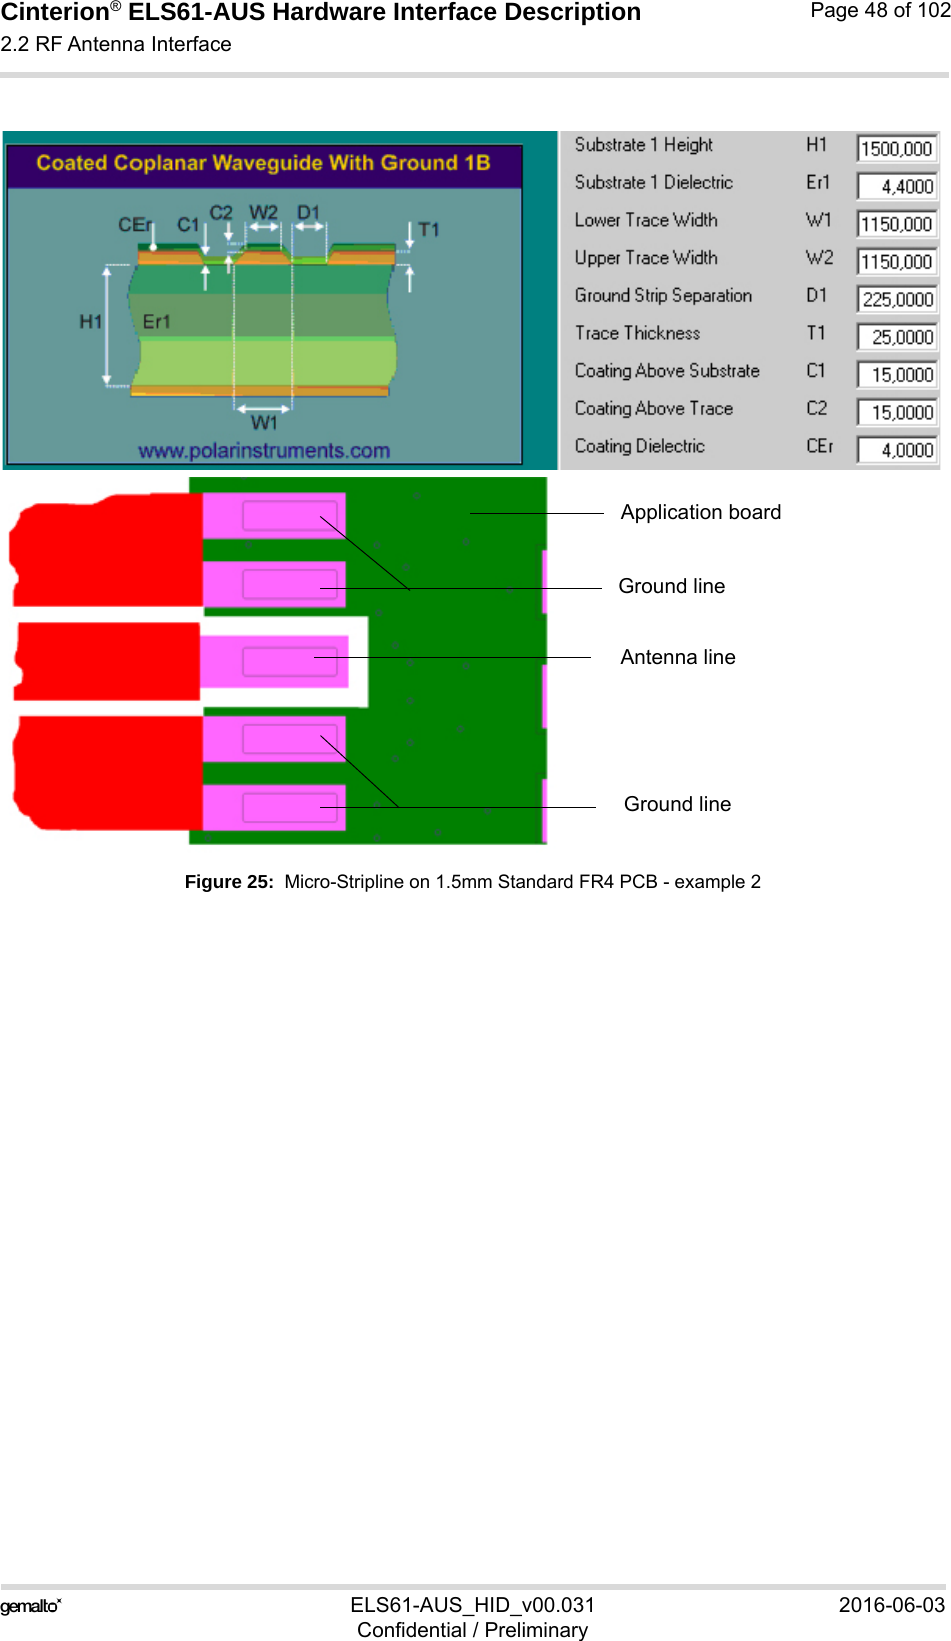 Cinterion® ELS61-AUS Hardware Interface Description2.2 RF Antenna Interface52ELS61-AUS_HID_v00.031 2016-06-03Confidential / PreliminaryPage 48 of 102Figure 25:  Micro-Stripline on 1.5mm Standard FR4 PCB - example 2Antenna lineGround lineGround lineApplication board